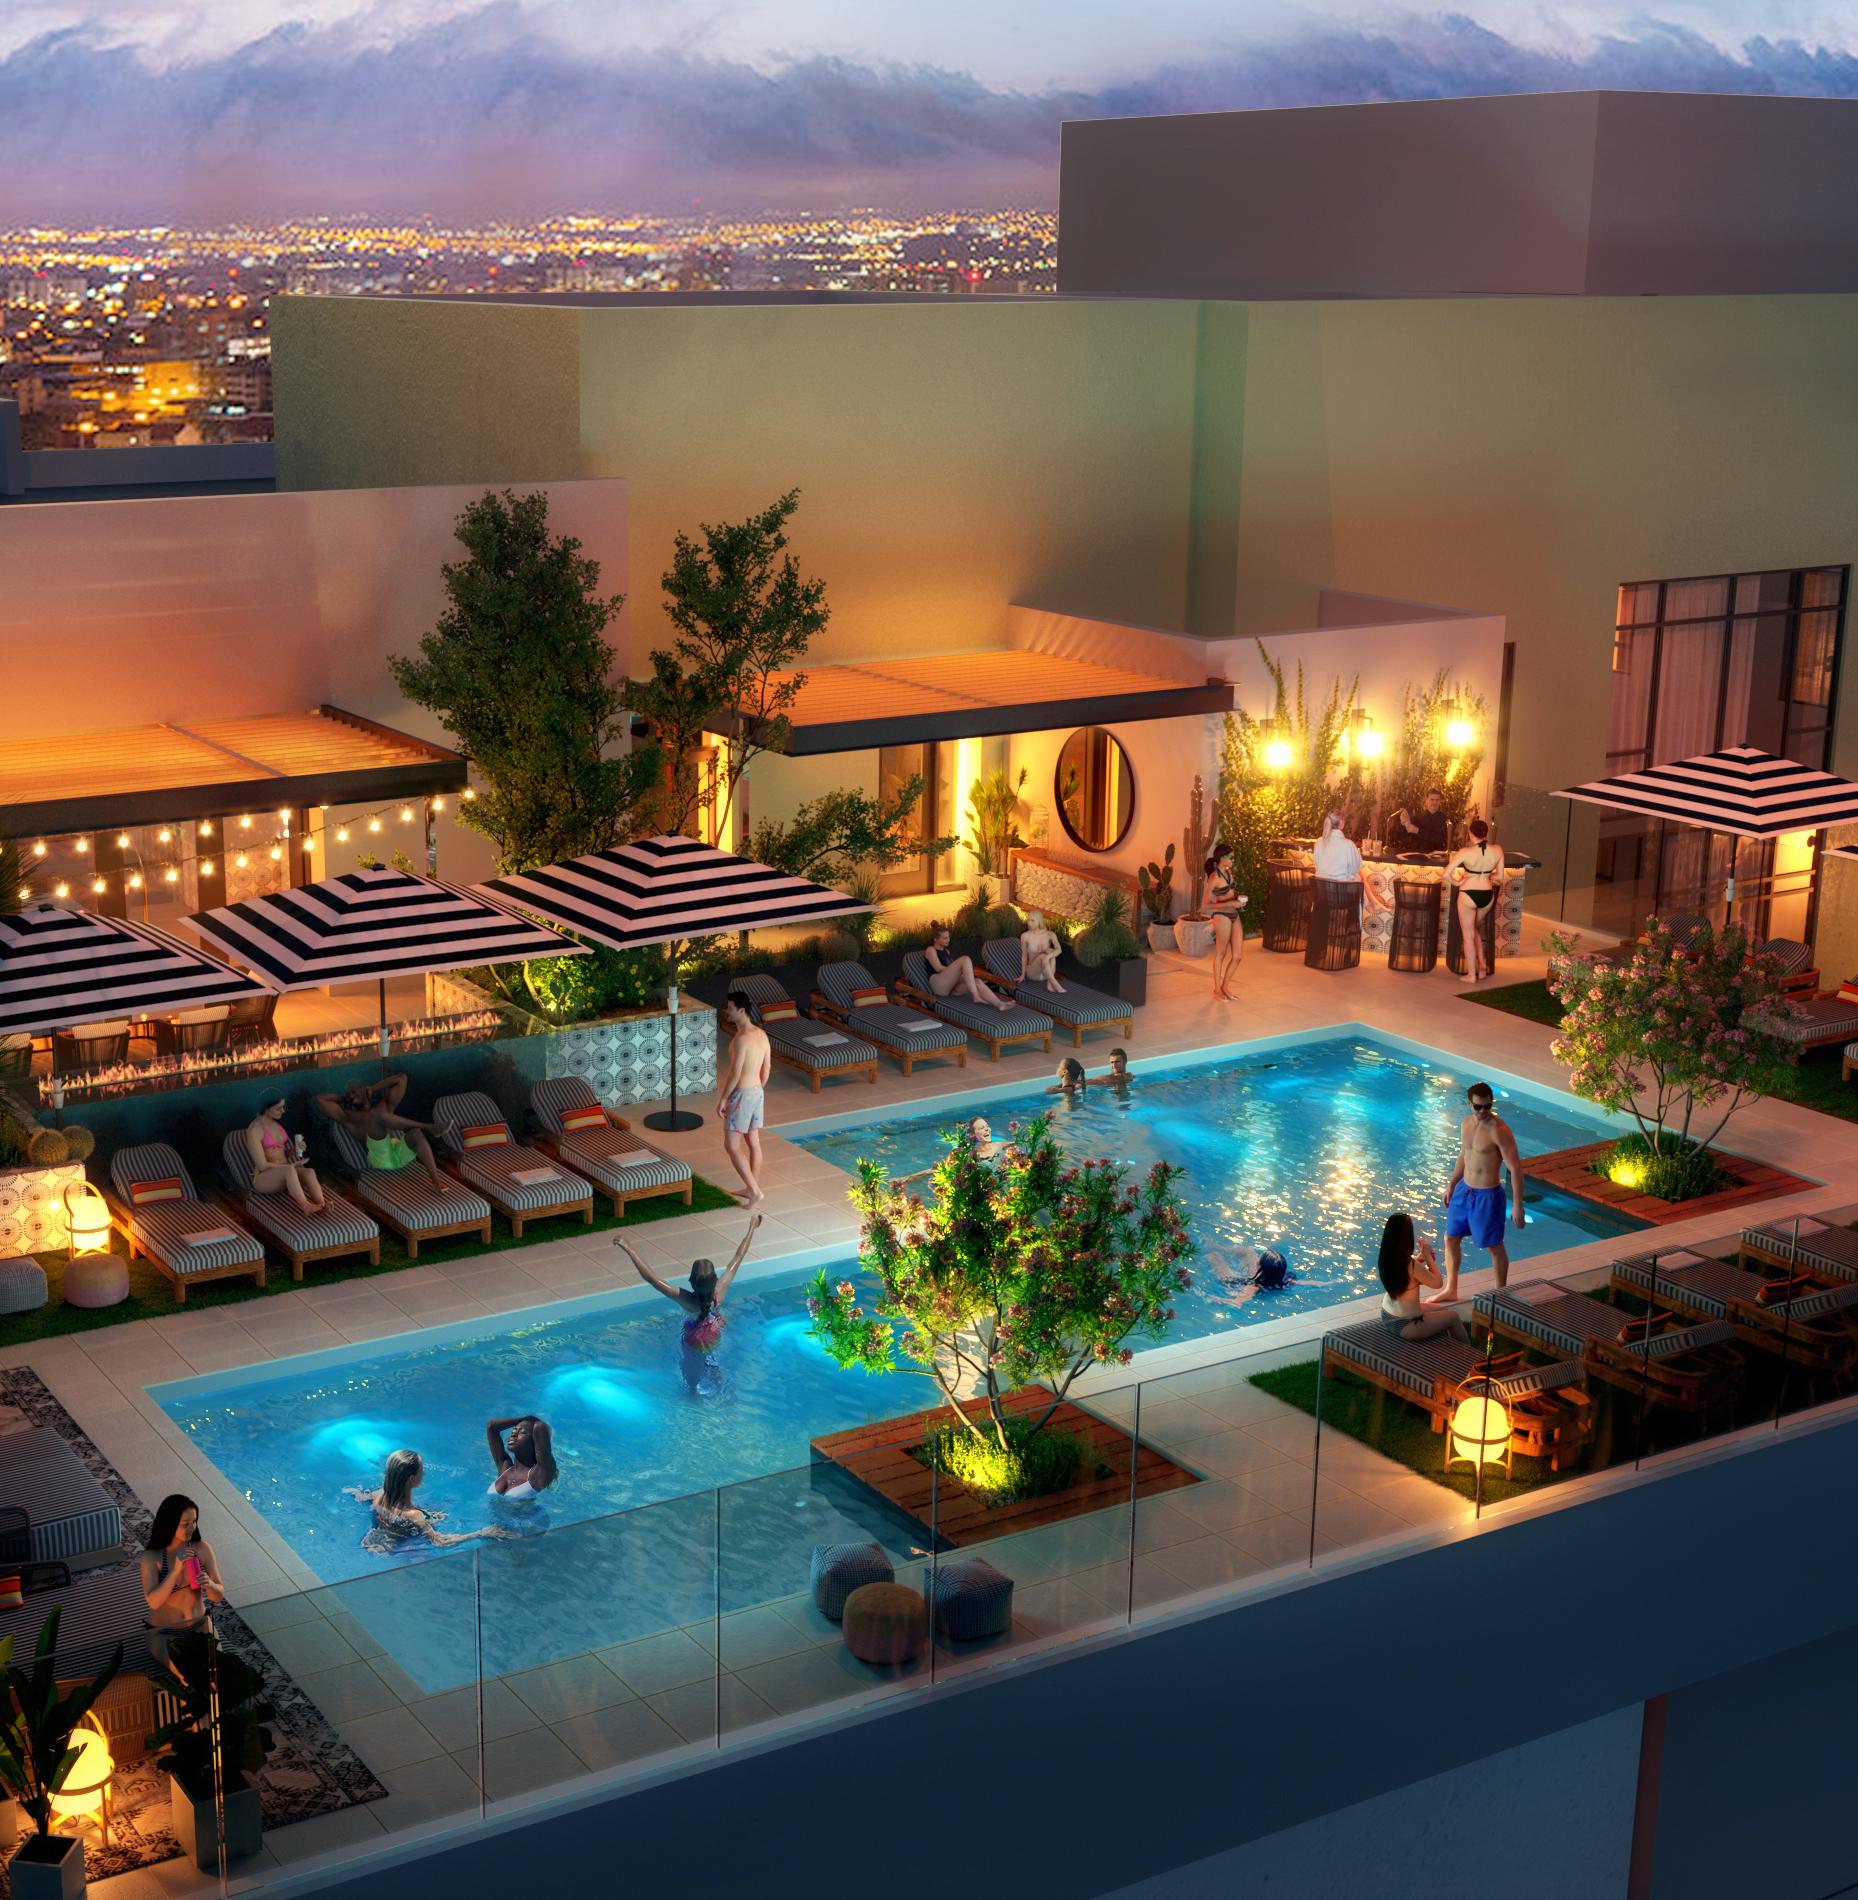 Rendering of the rooftop pool and hot tub at Moontower Phoenix, luxury apartments on Roosevelt Row.